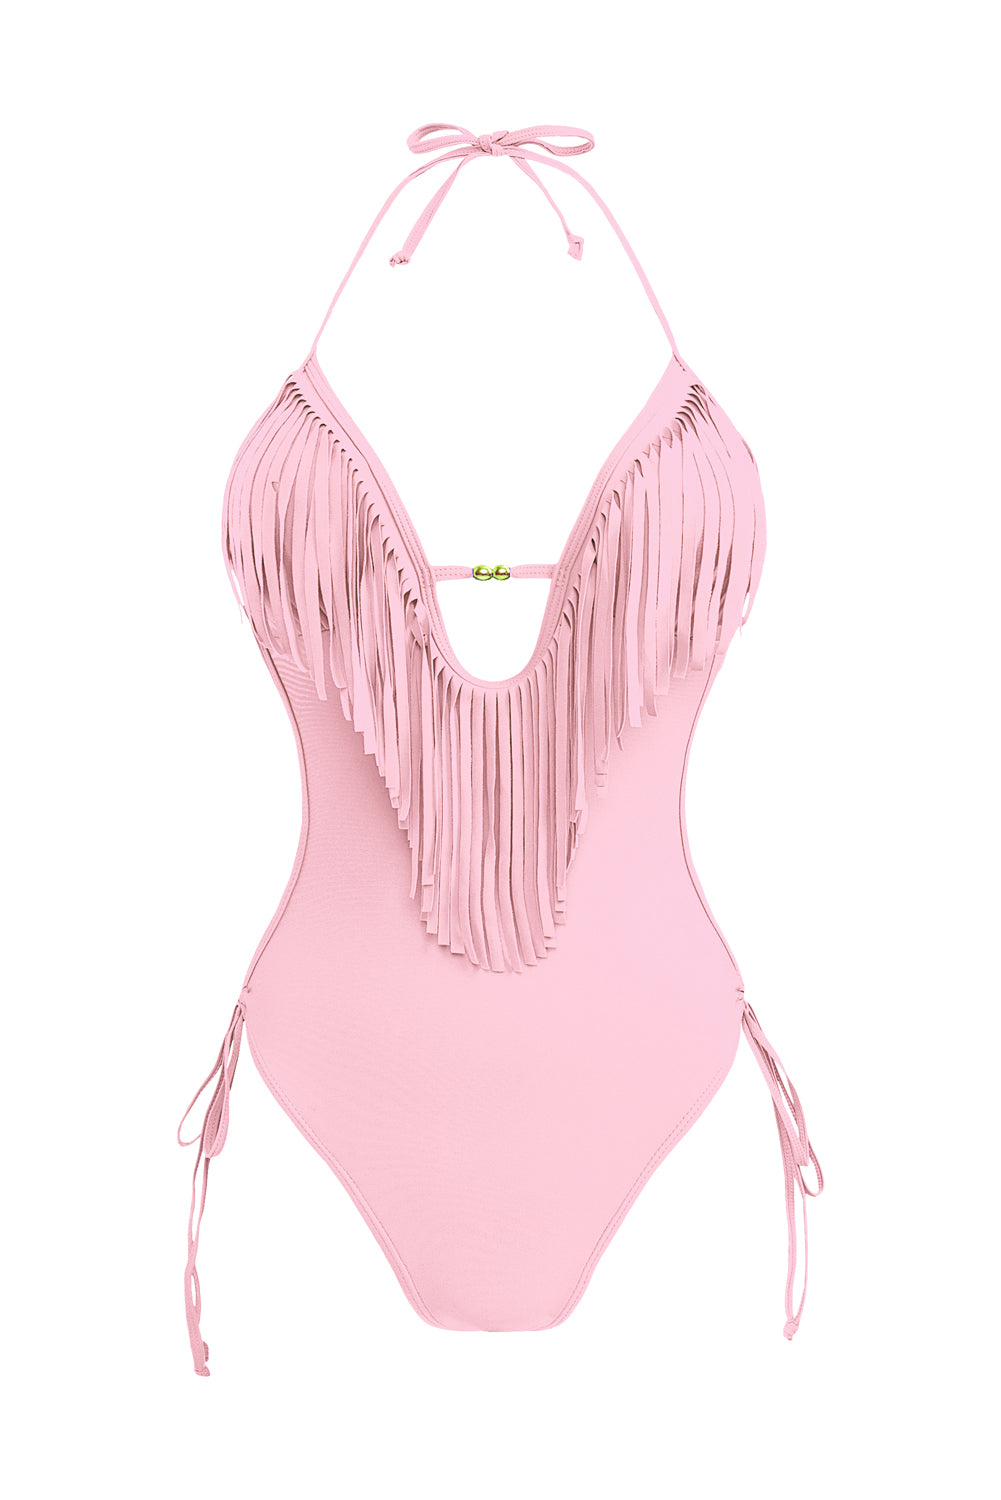 LC443432-10-S, LC443432-10-M, LC443432-10-L, LC443432-10-XL, LC443432-10-2XL, Pink Tassel One Piece Swimsuits for Women Halter Backless Sexy Swimwear